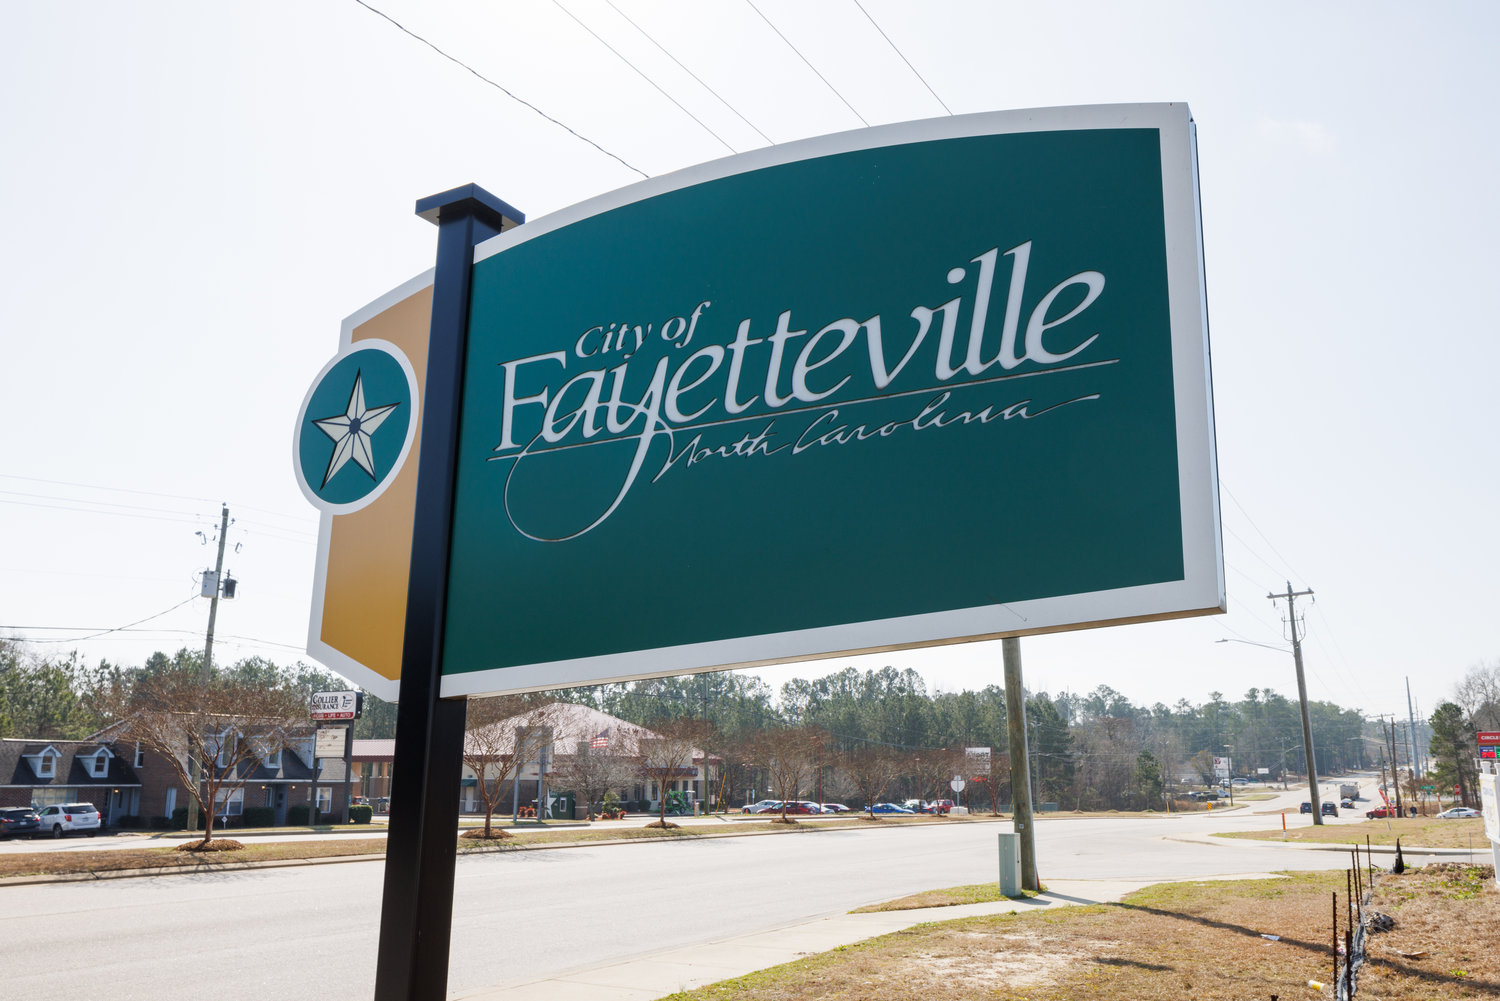 The Fayetteville City Council discussed policies on affordable housing Monday night.